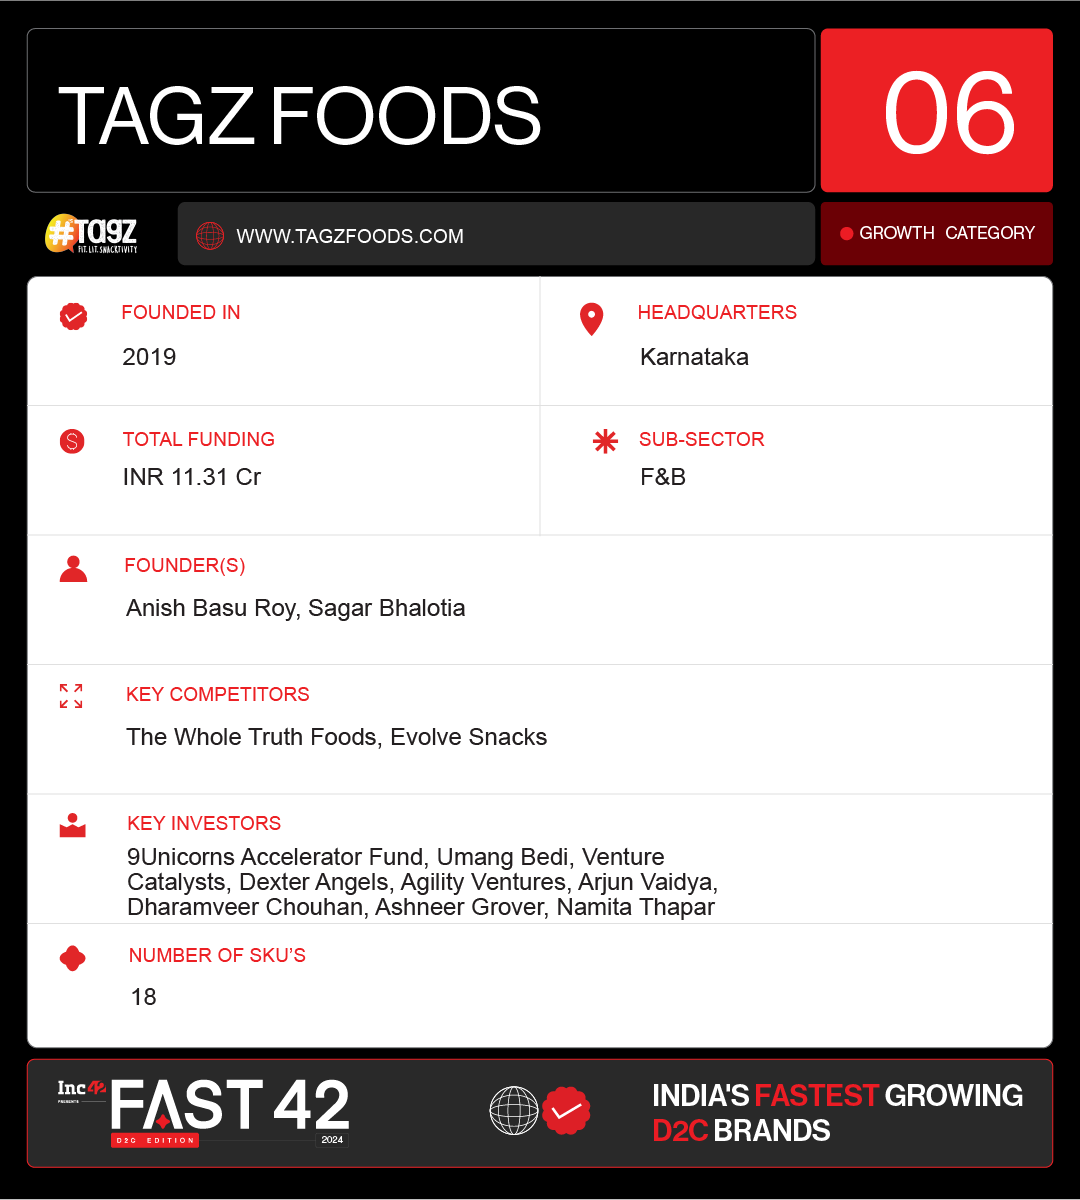 TagZ Foods Offers ‘Better Snacking’ Without Compromising Taste